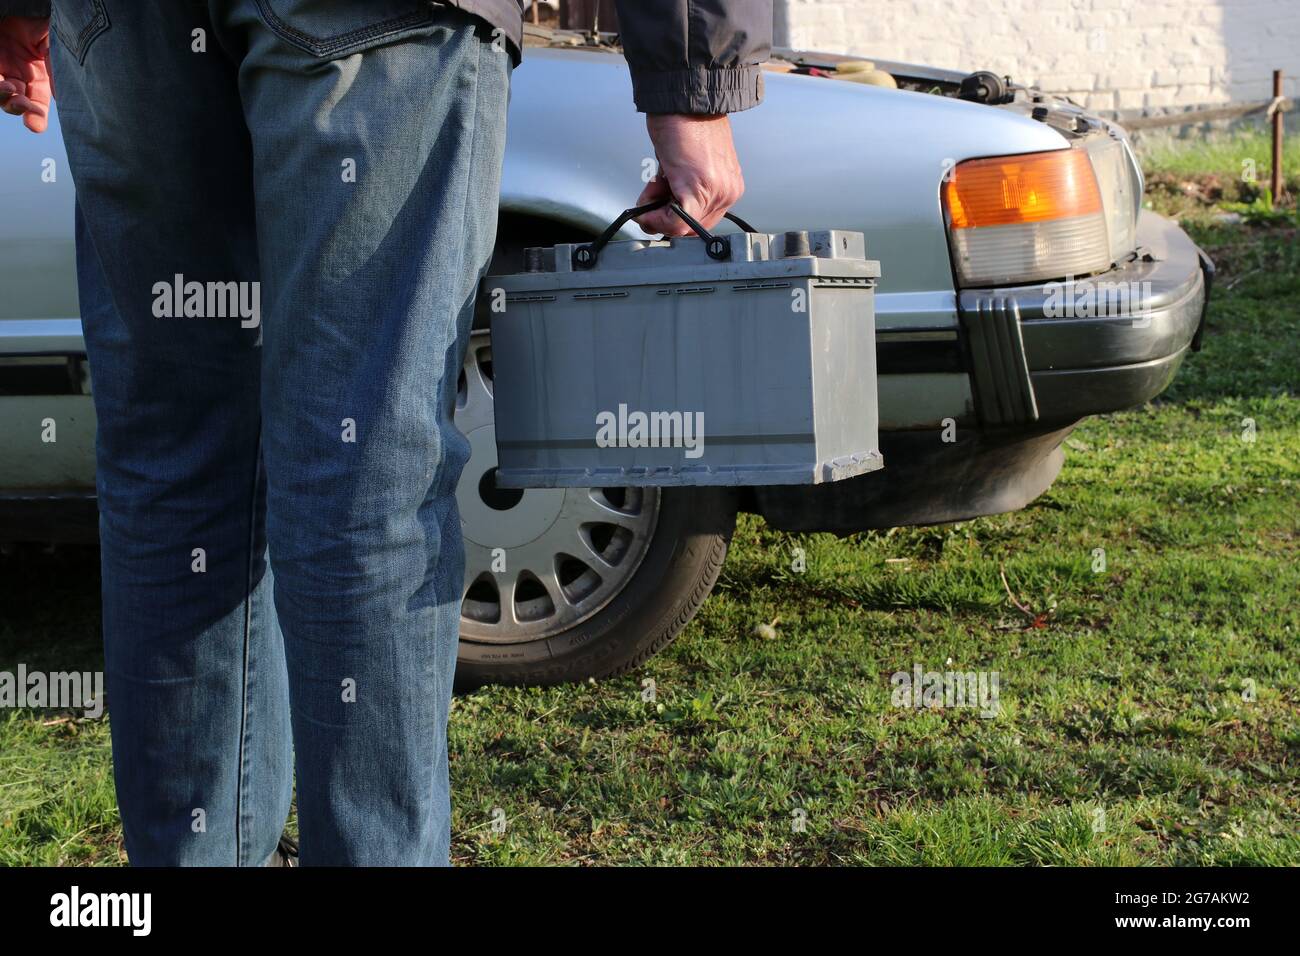 A woman carries a car battery for installation in a car. Stock Photo